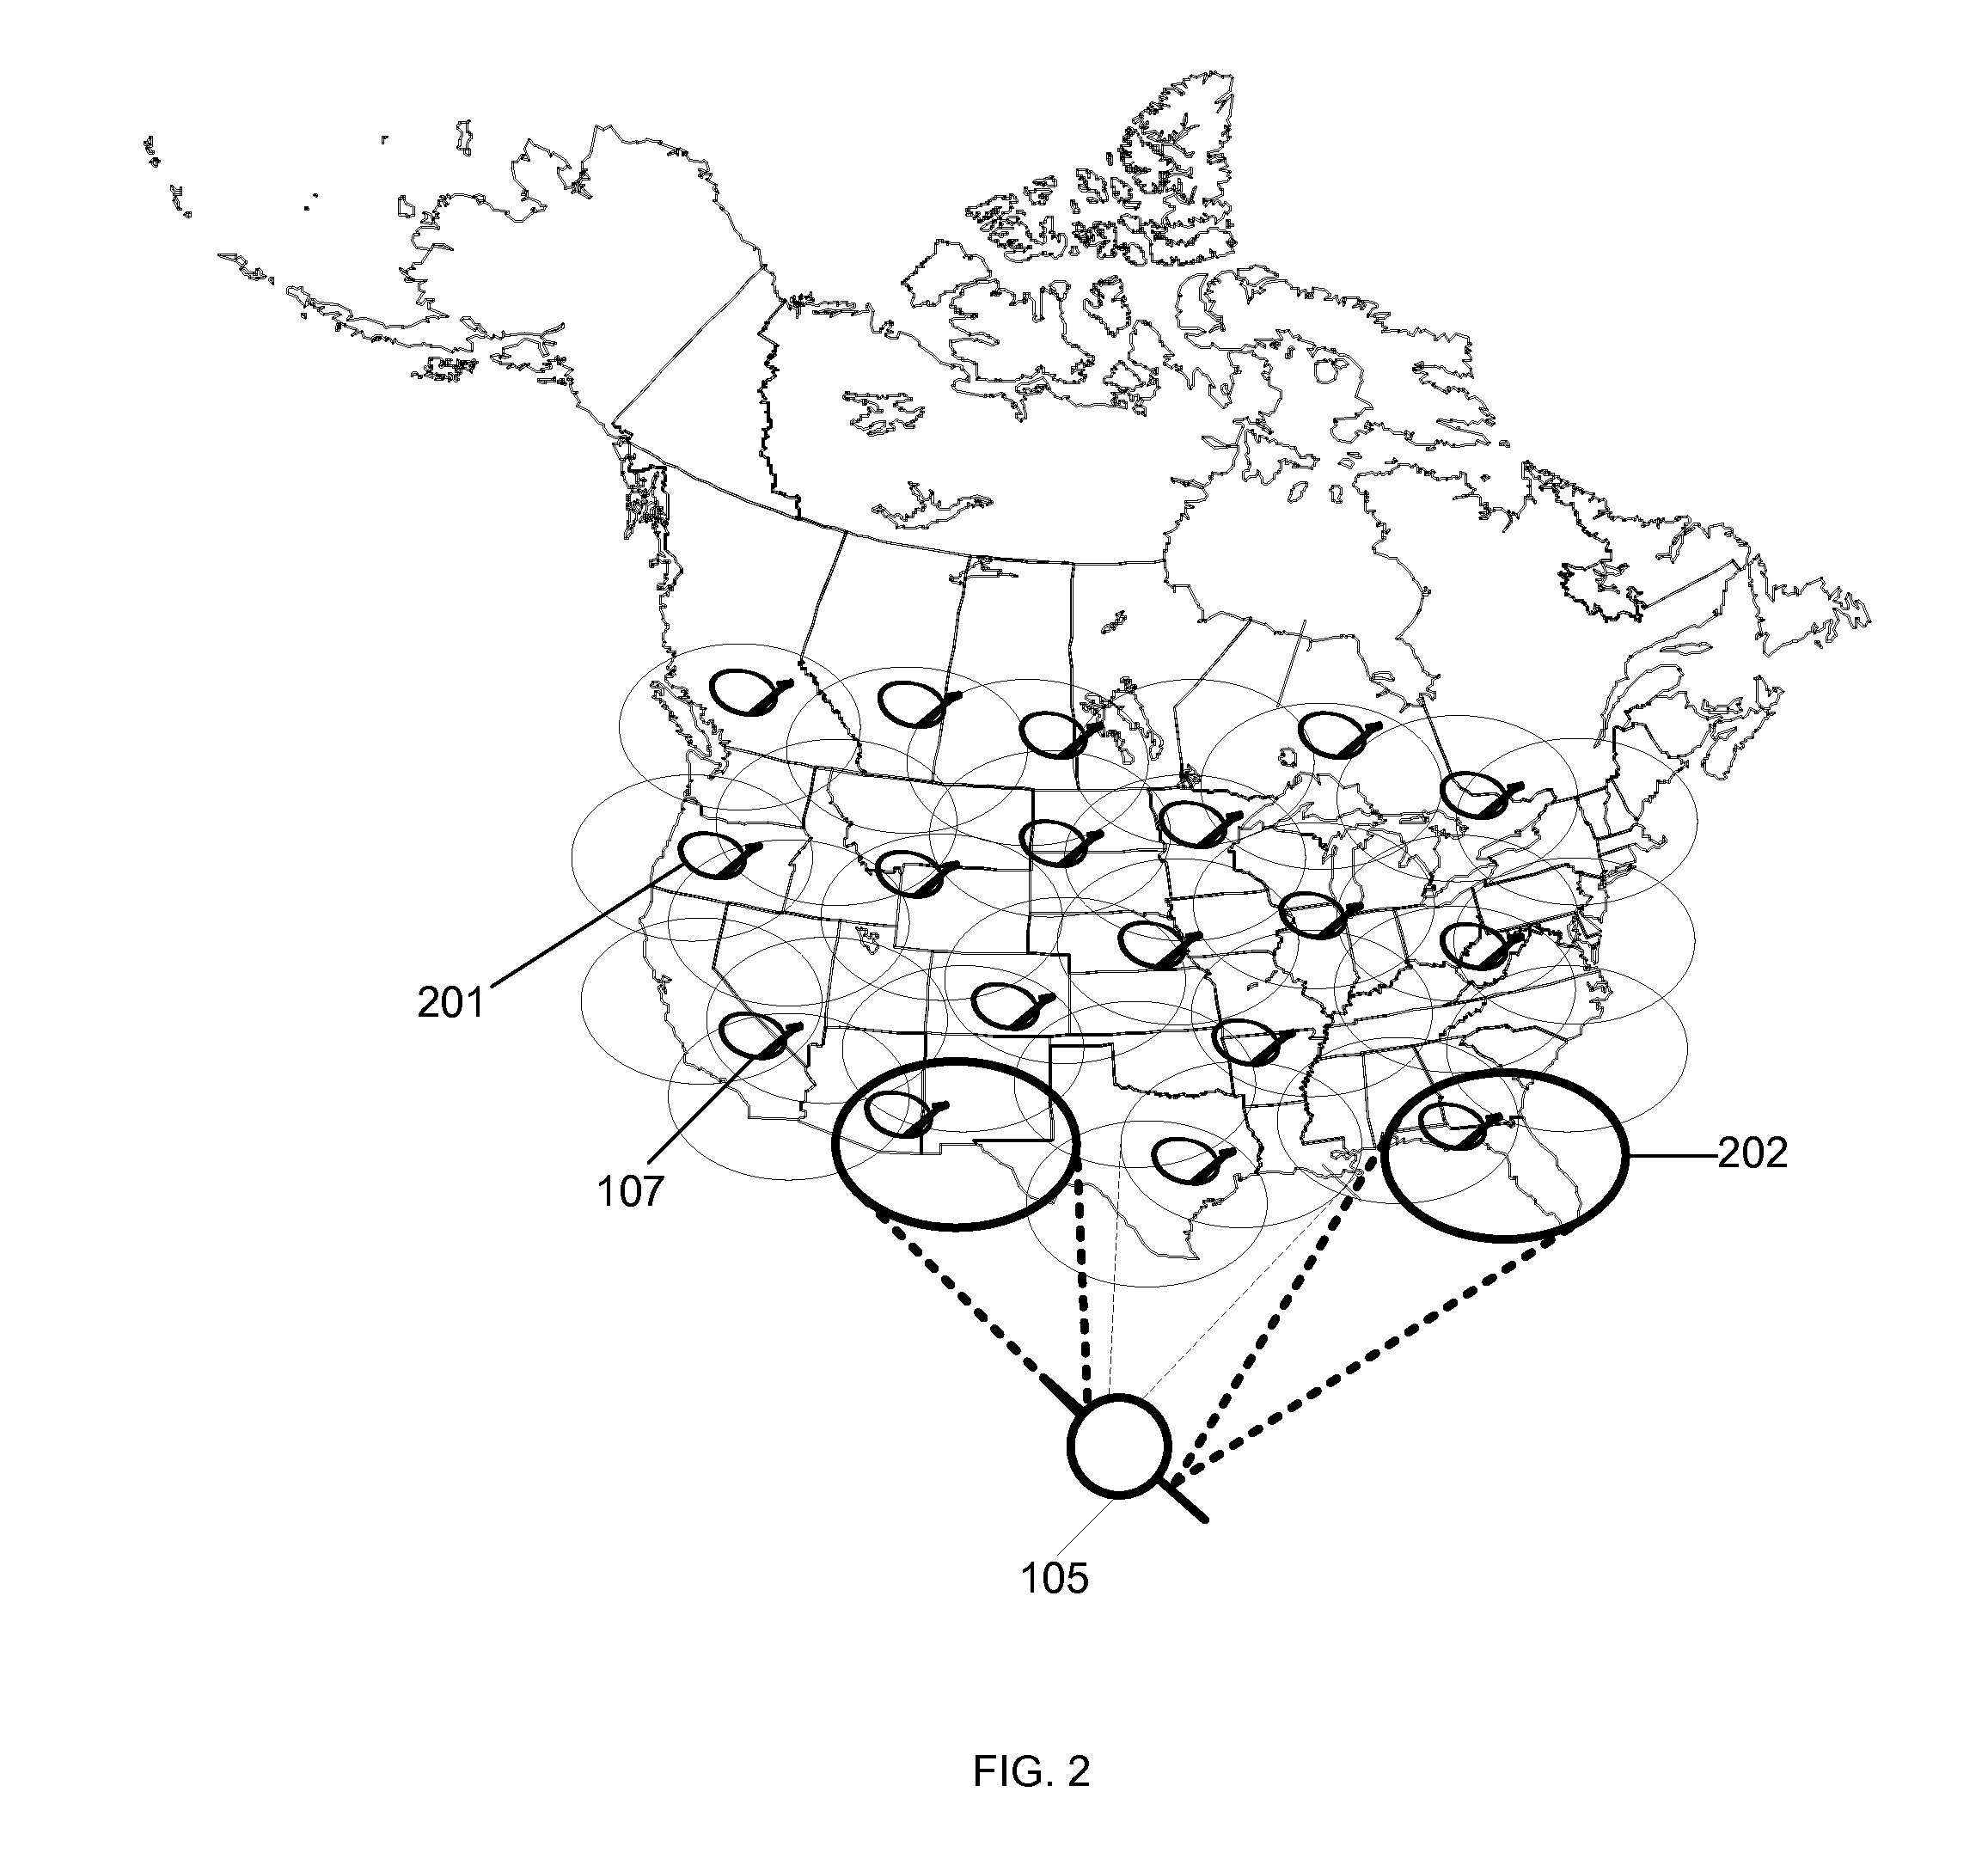 Method for iterative estimation of global parameters